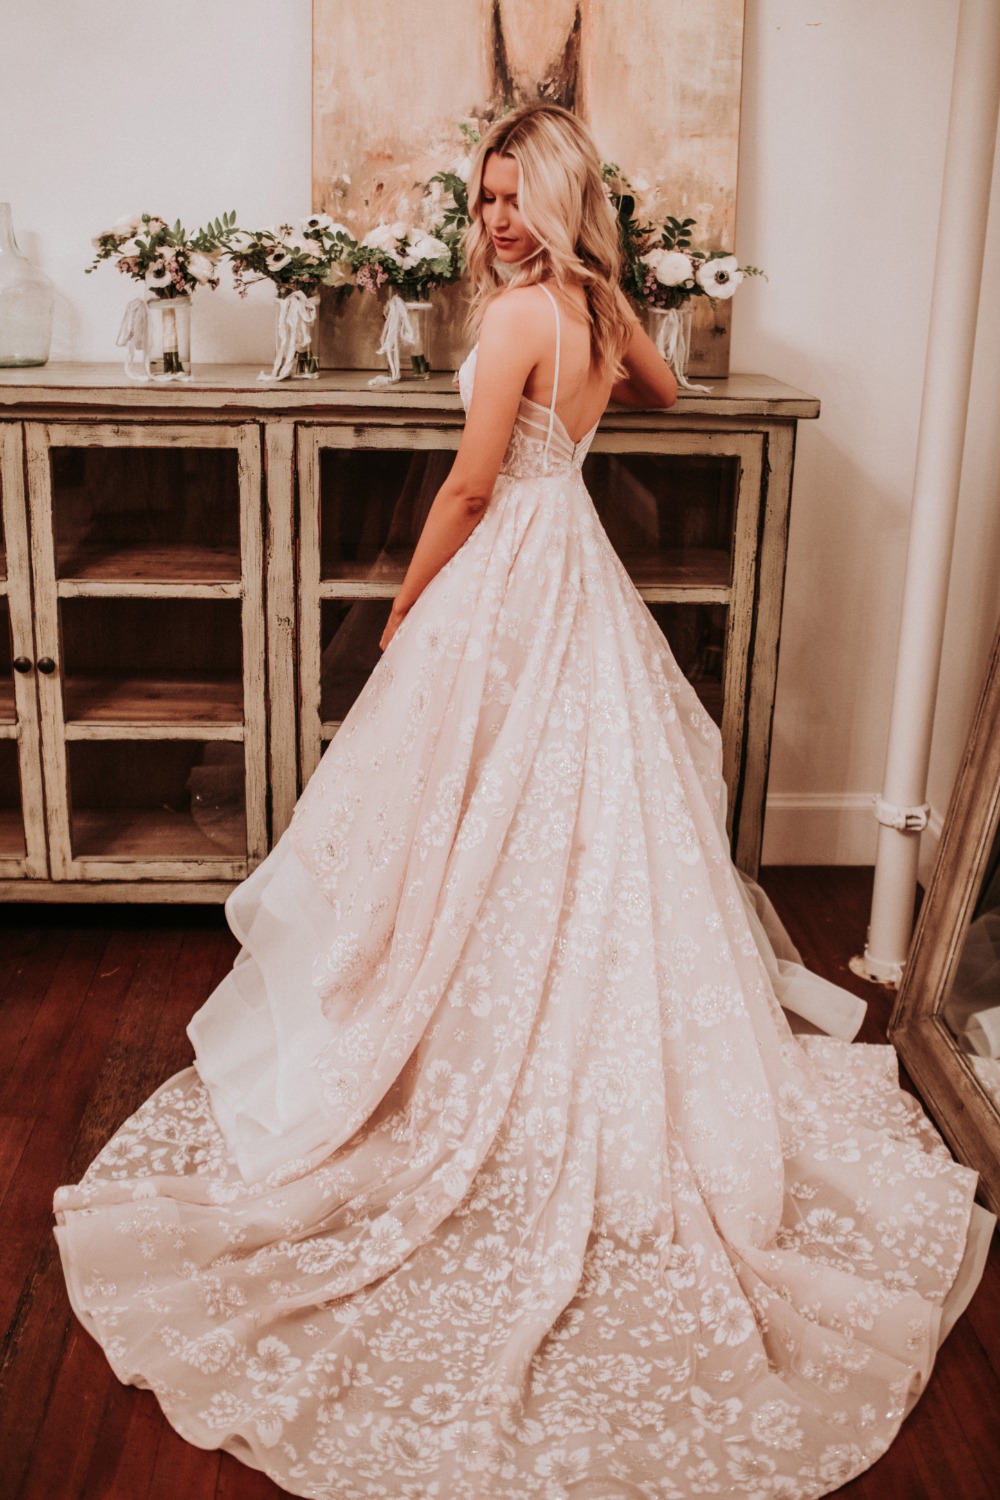 floral print wedding dress by Hayley Paige